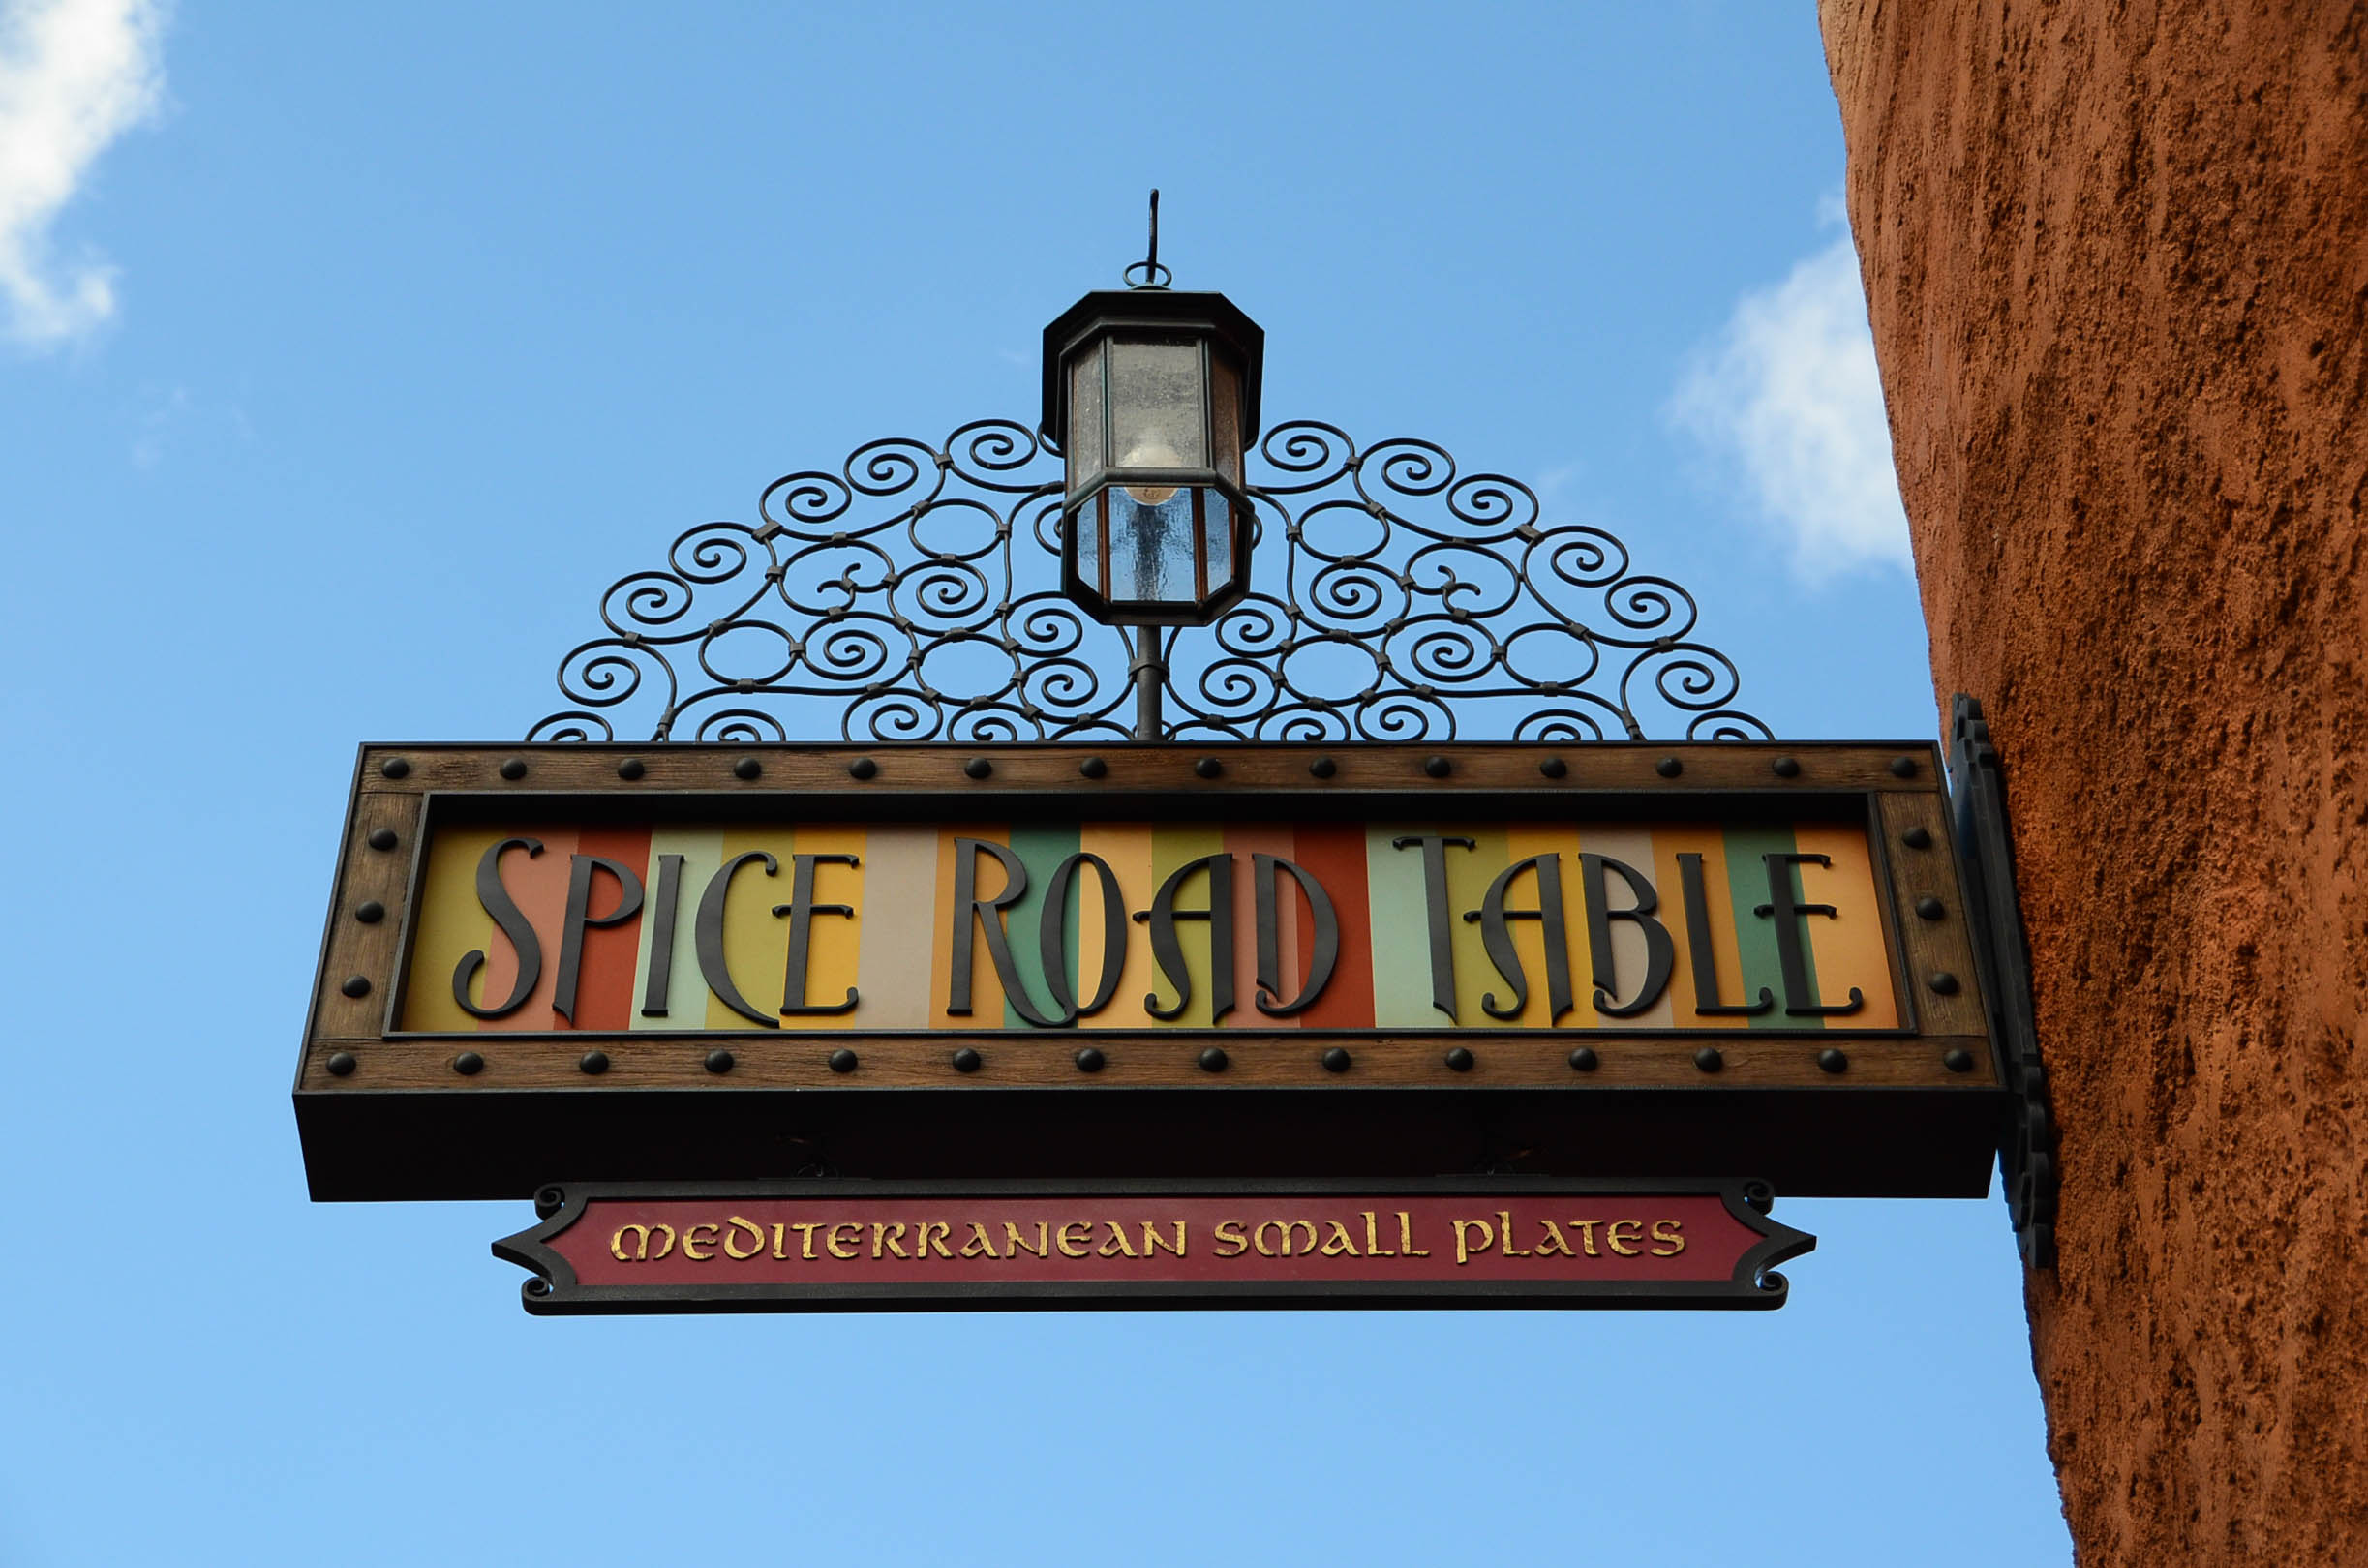 Reserve Your Seat at Epcot’s New Spice Road Table Restaurant